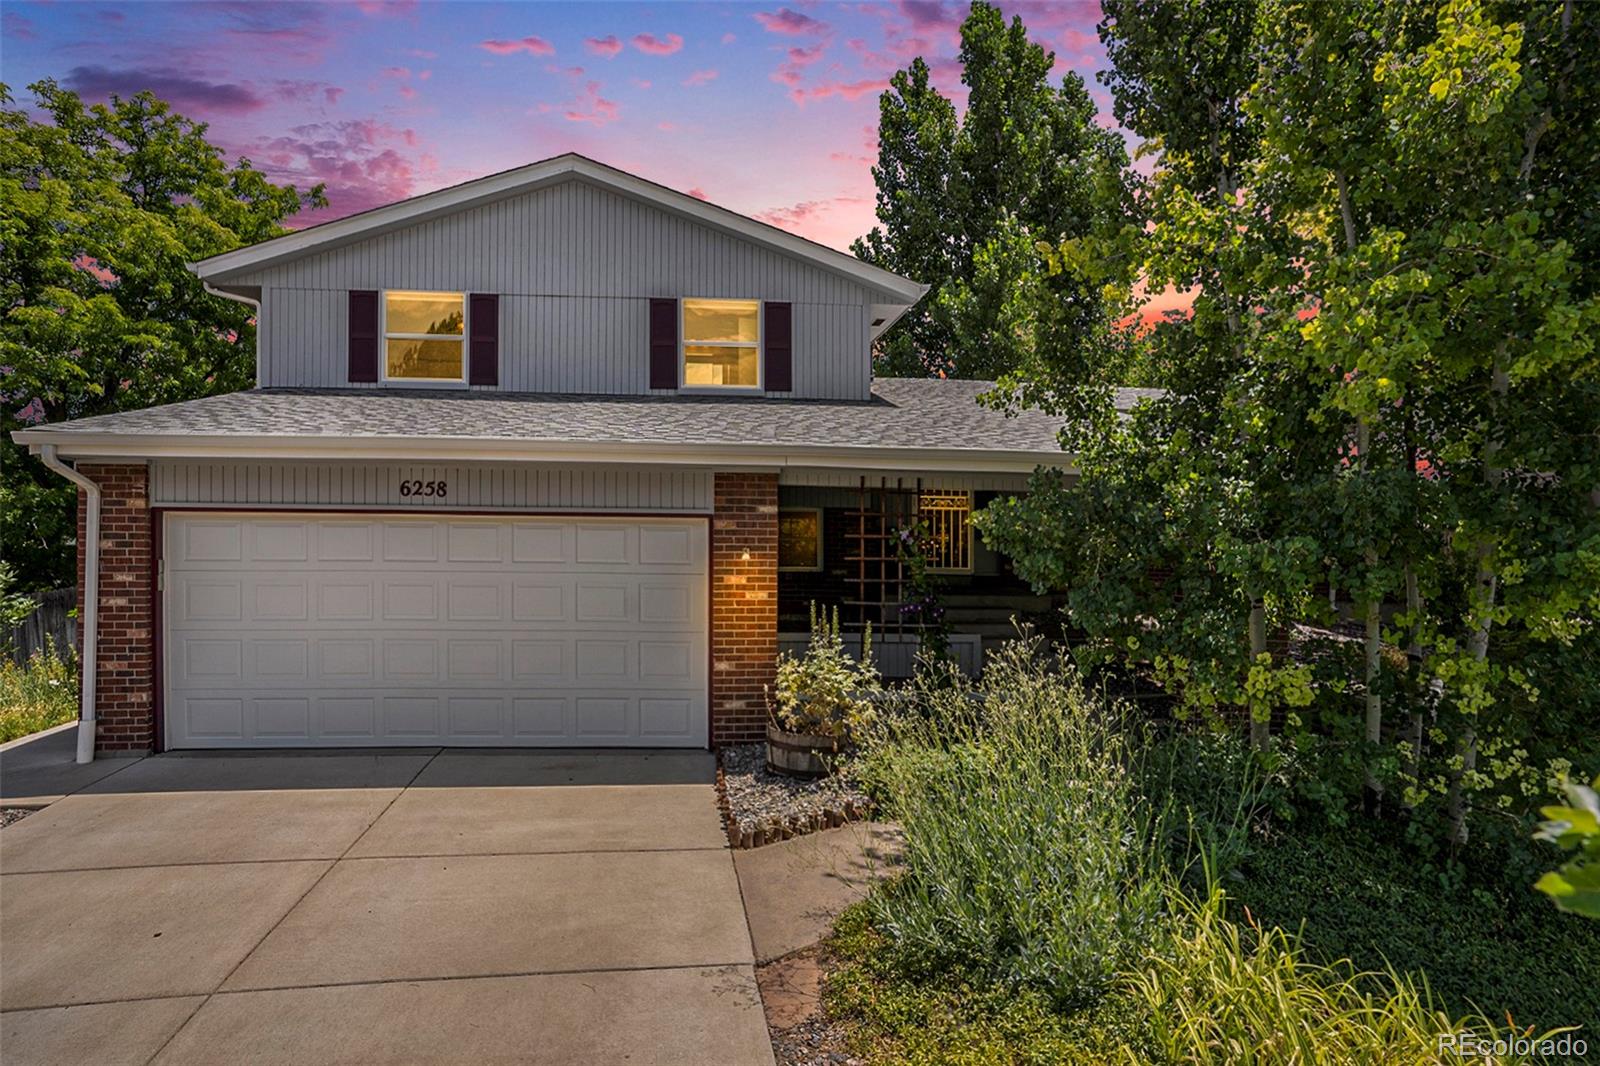 CMA Image for 6258 S Chase Court,Littleton, Colorado